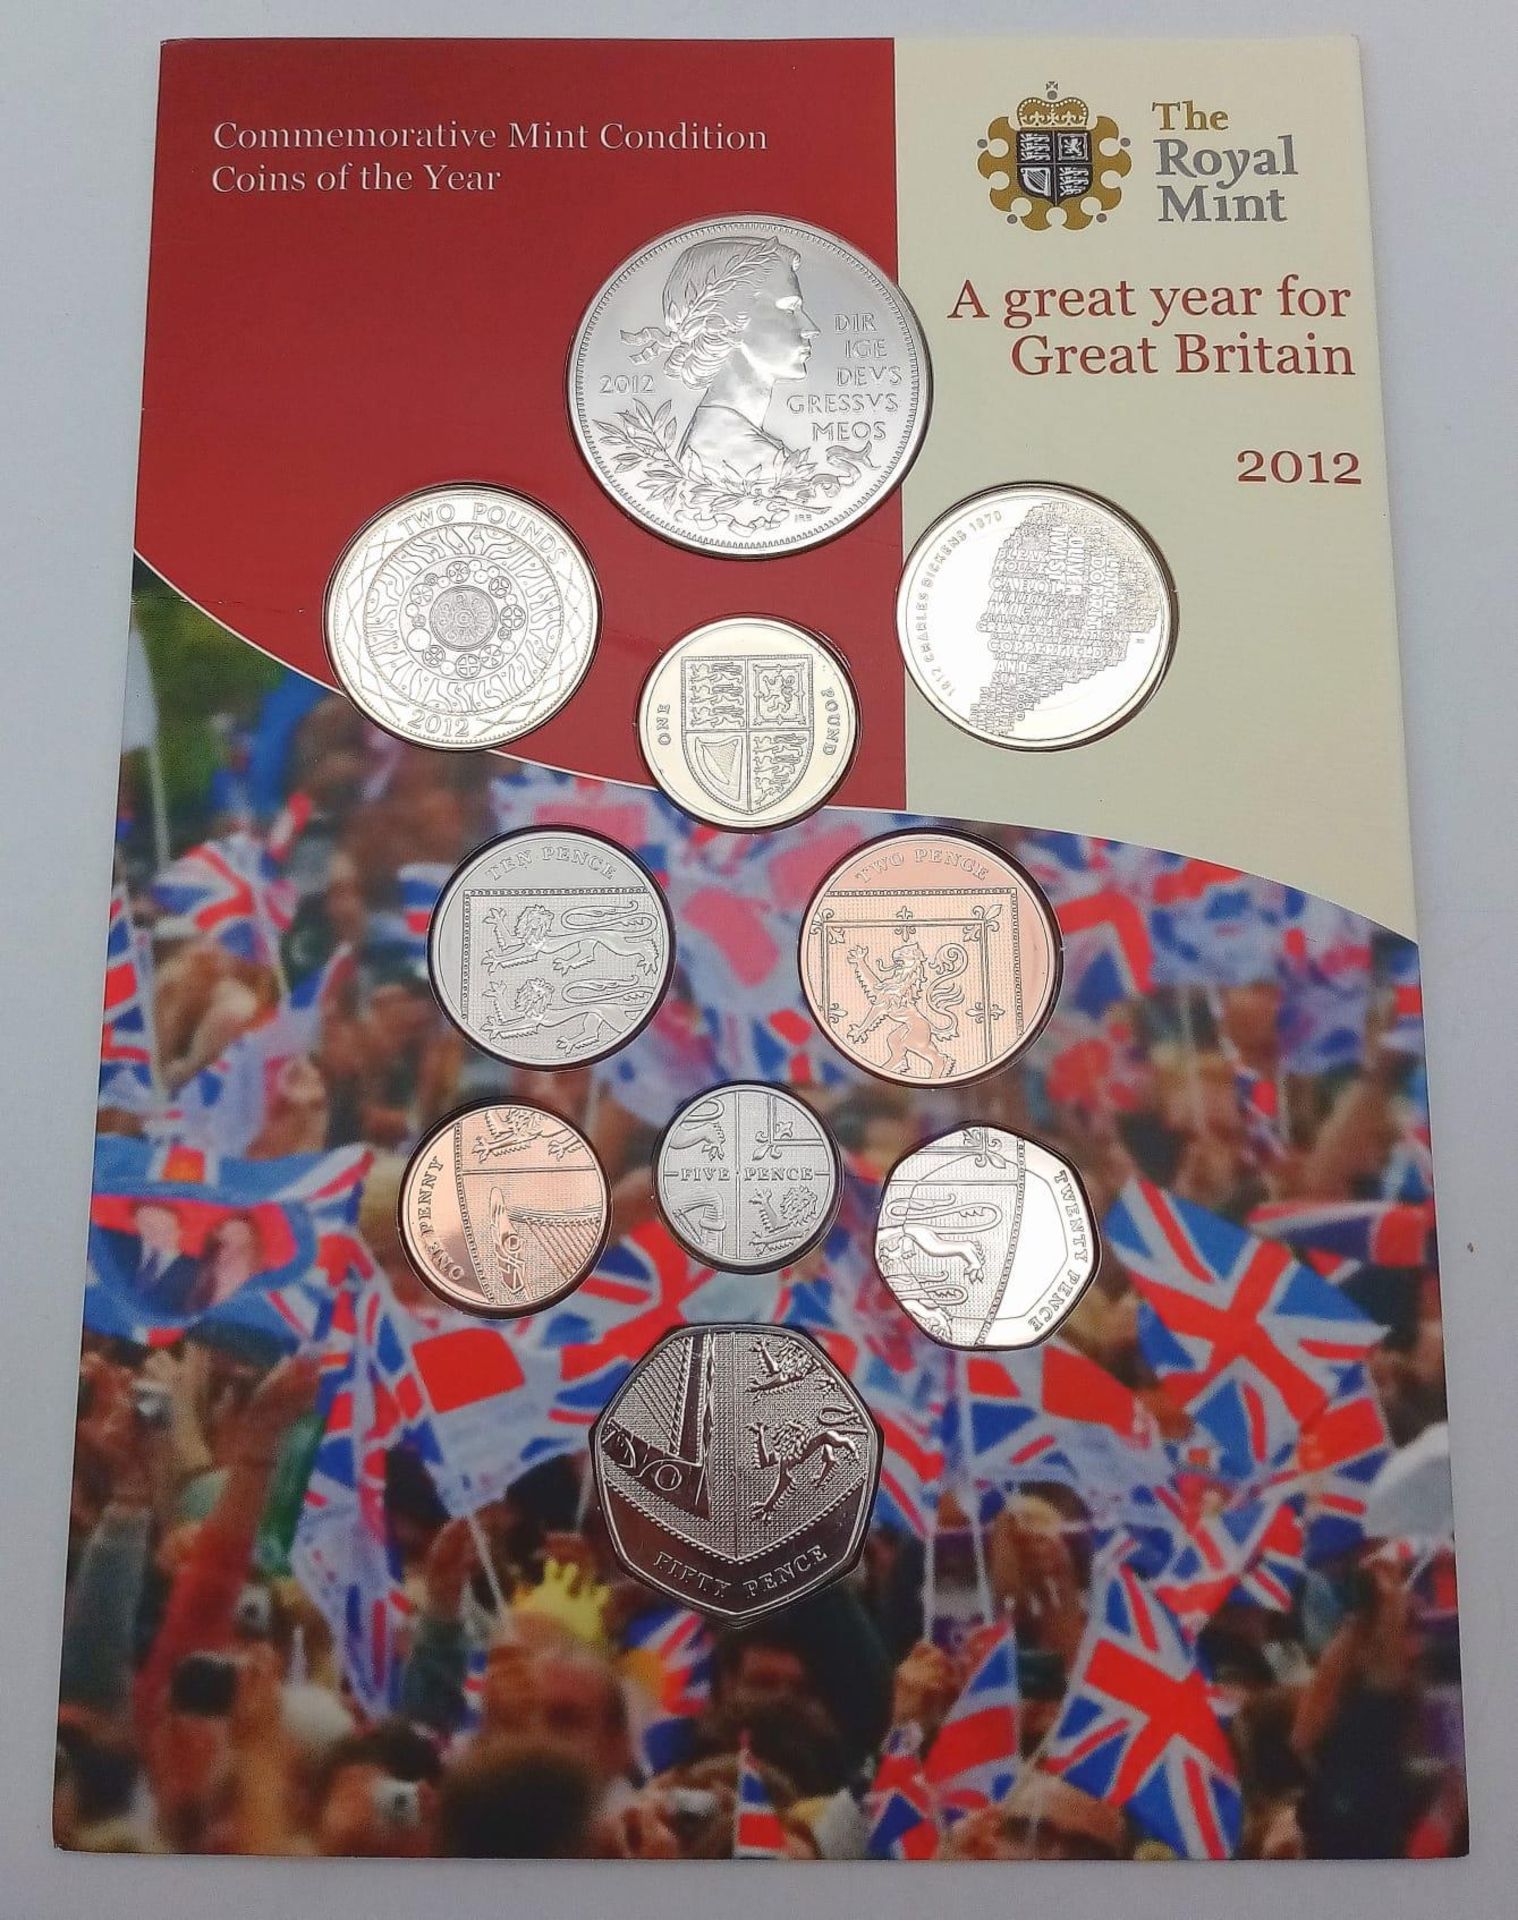 A Great Year For Great Britain Uncirculated Mint Commemorative Coin Set.